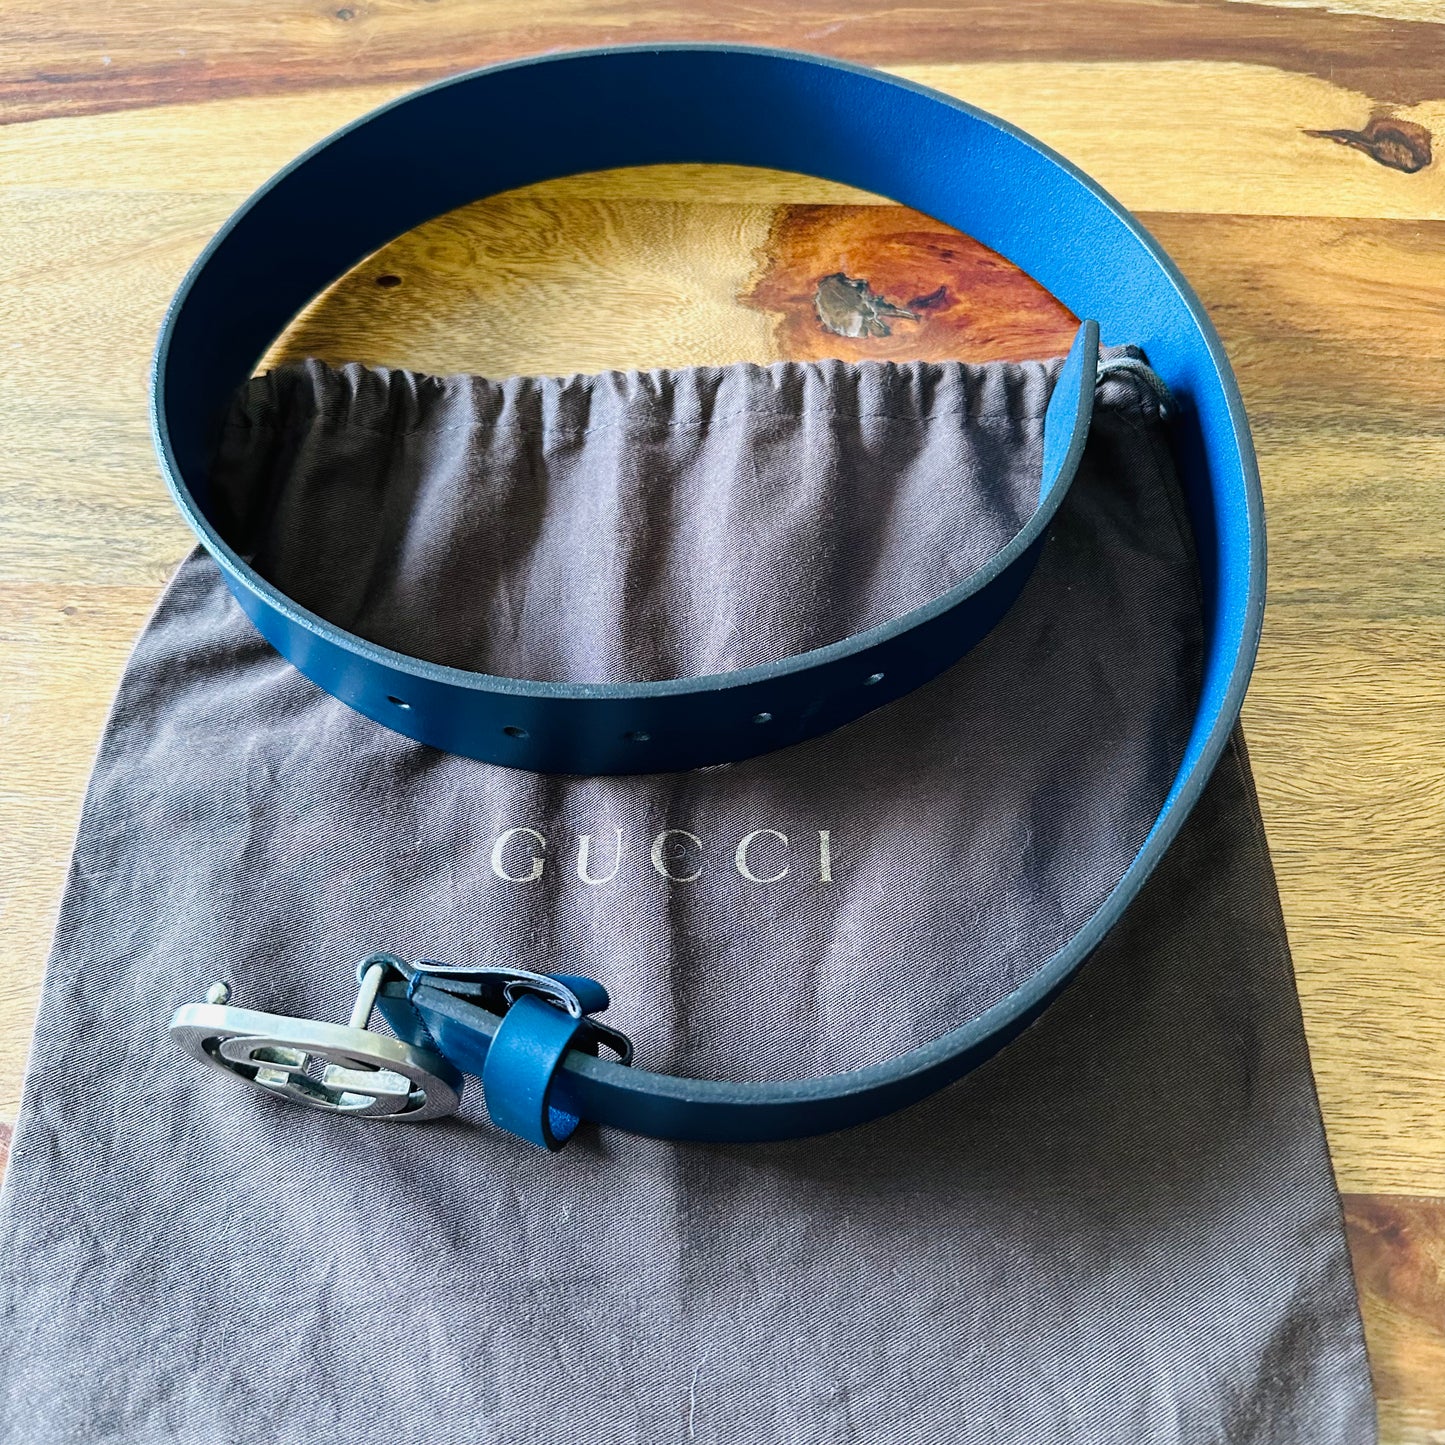 Gucci Leather Belt - Size 32 Inches